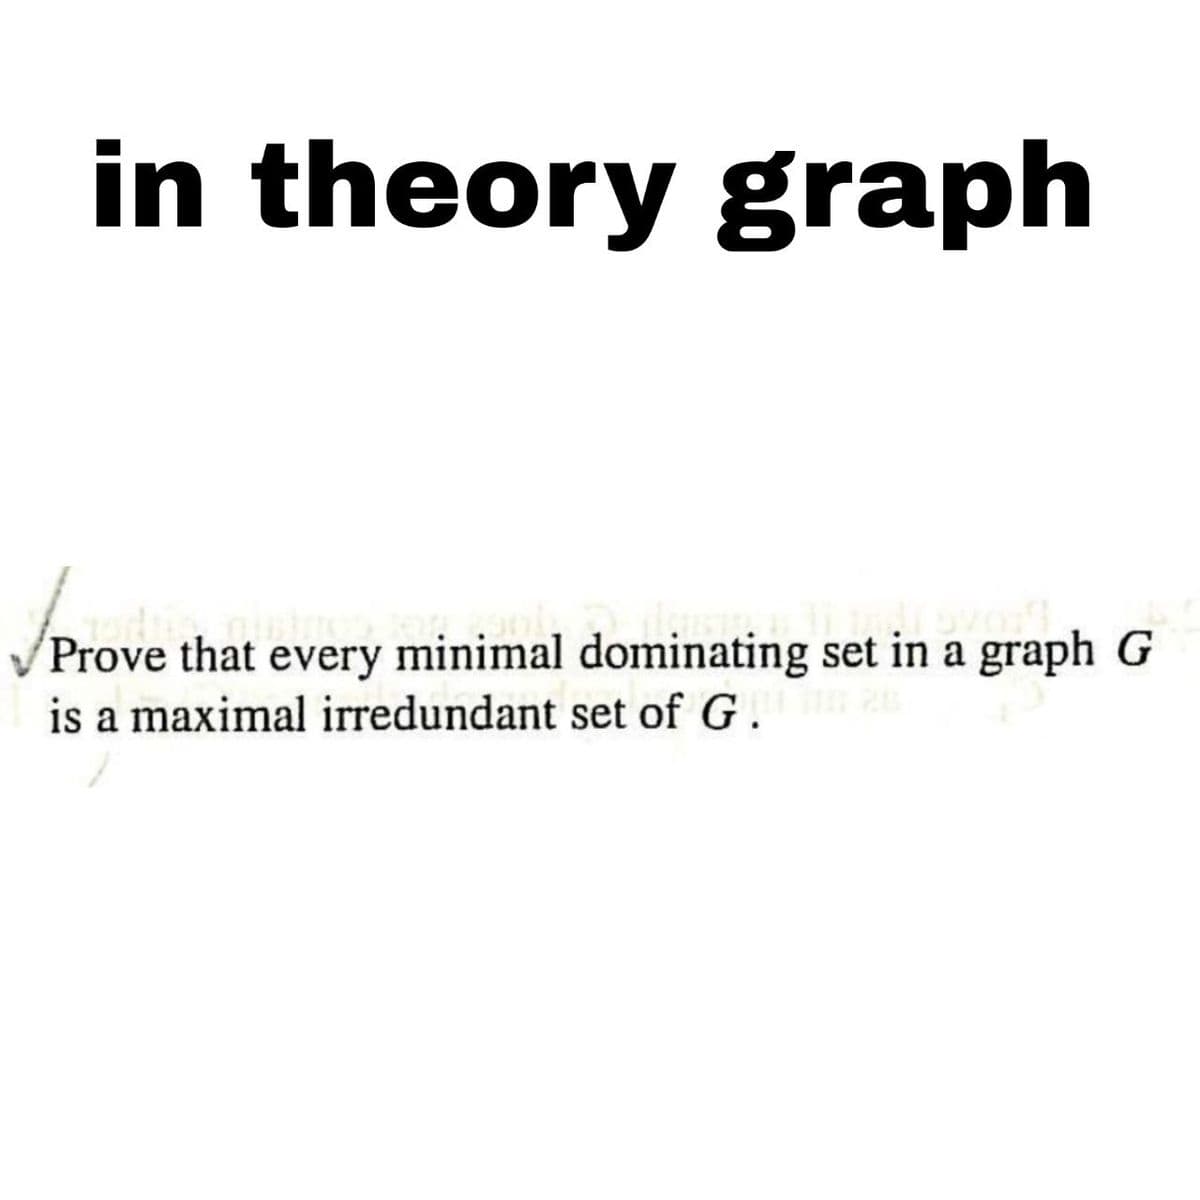 in theory graph
Prove that every minimal dominating set in a graph G
is a maximal irredundant set of G. 20